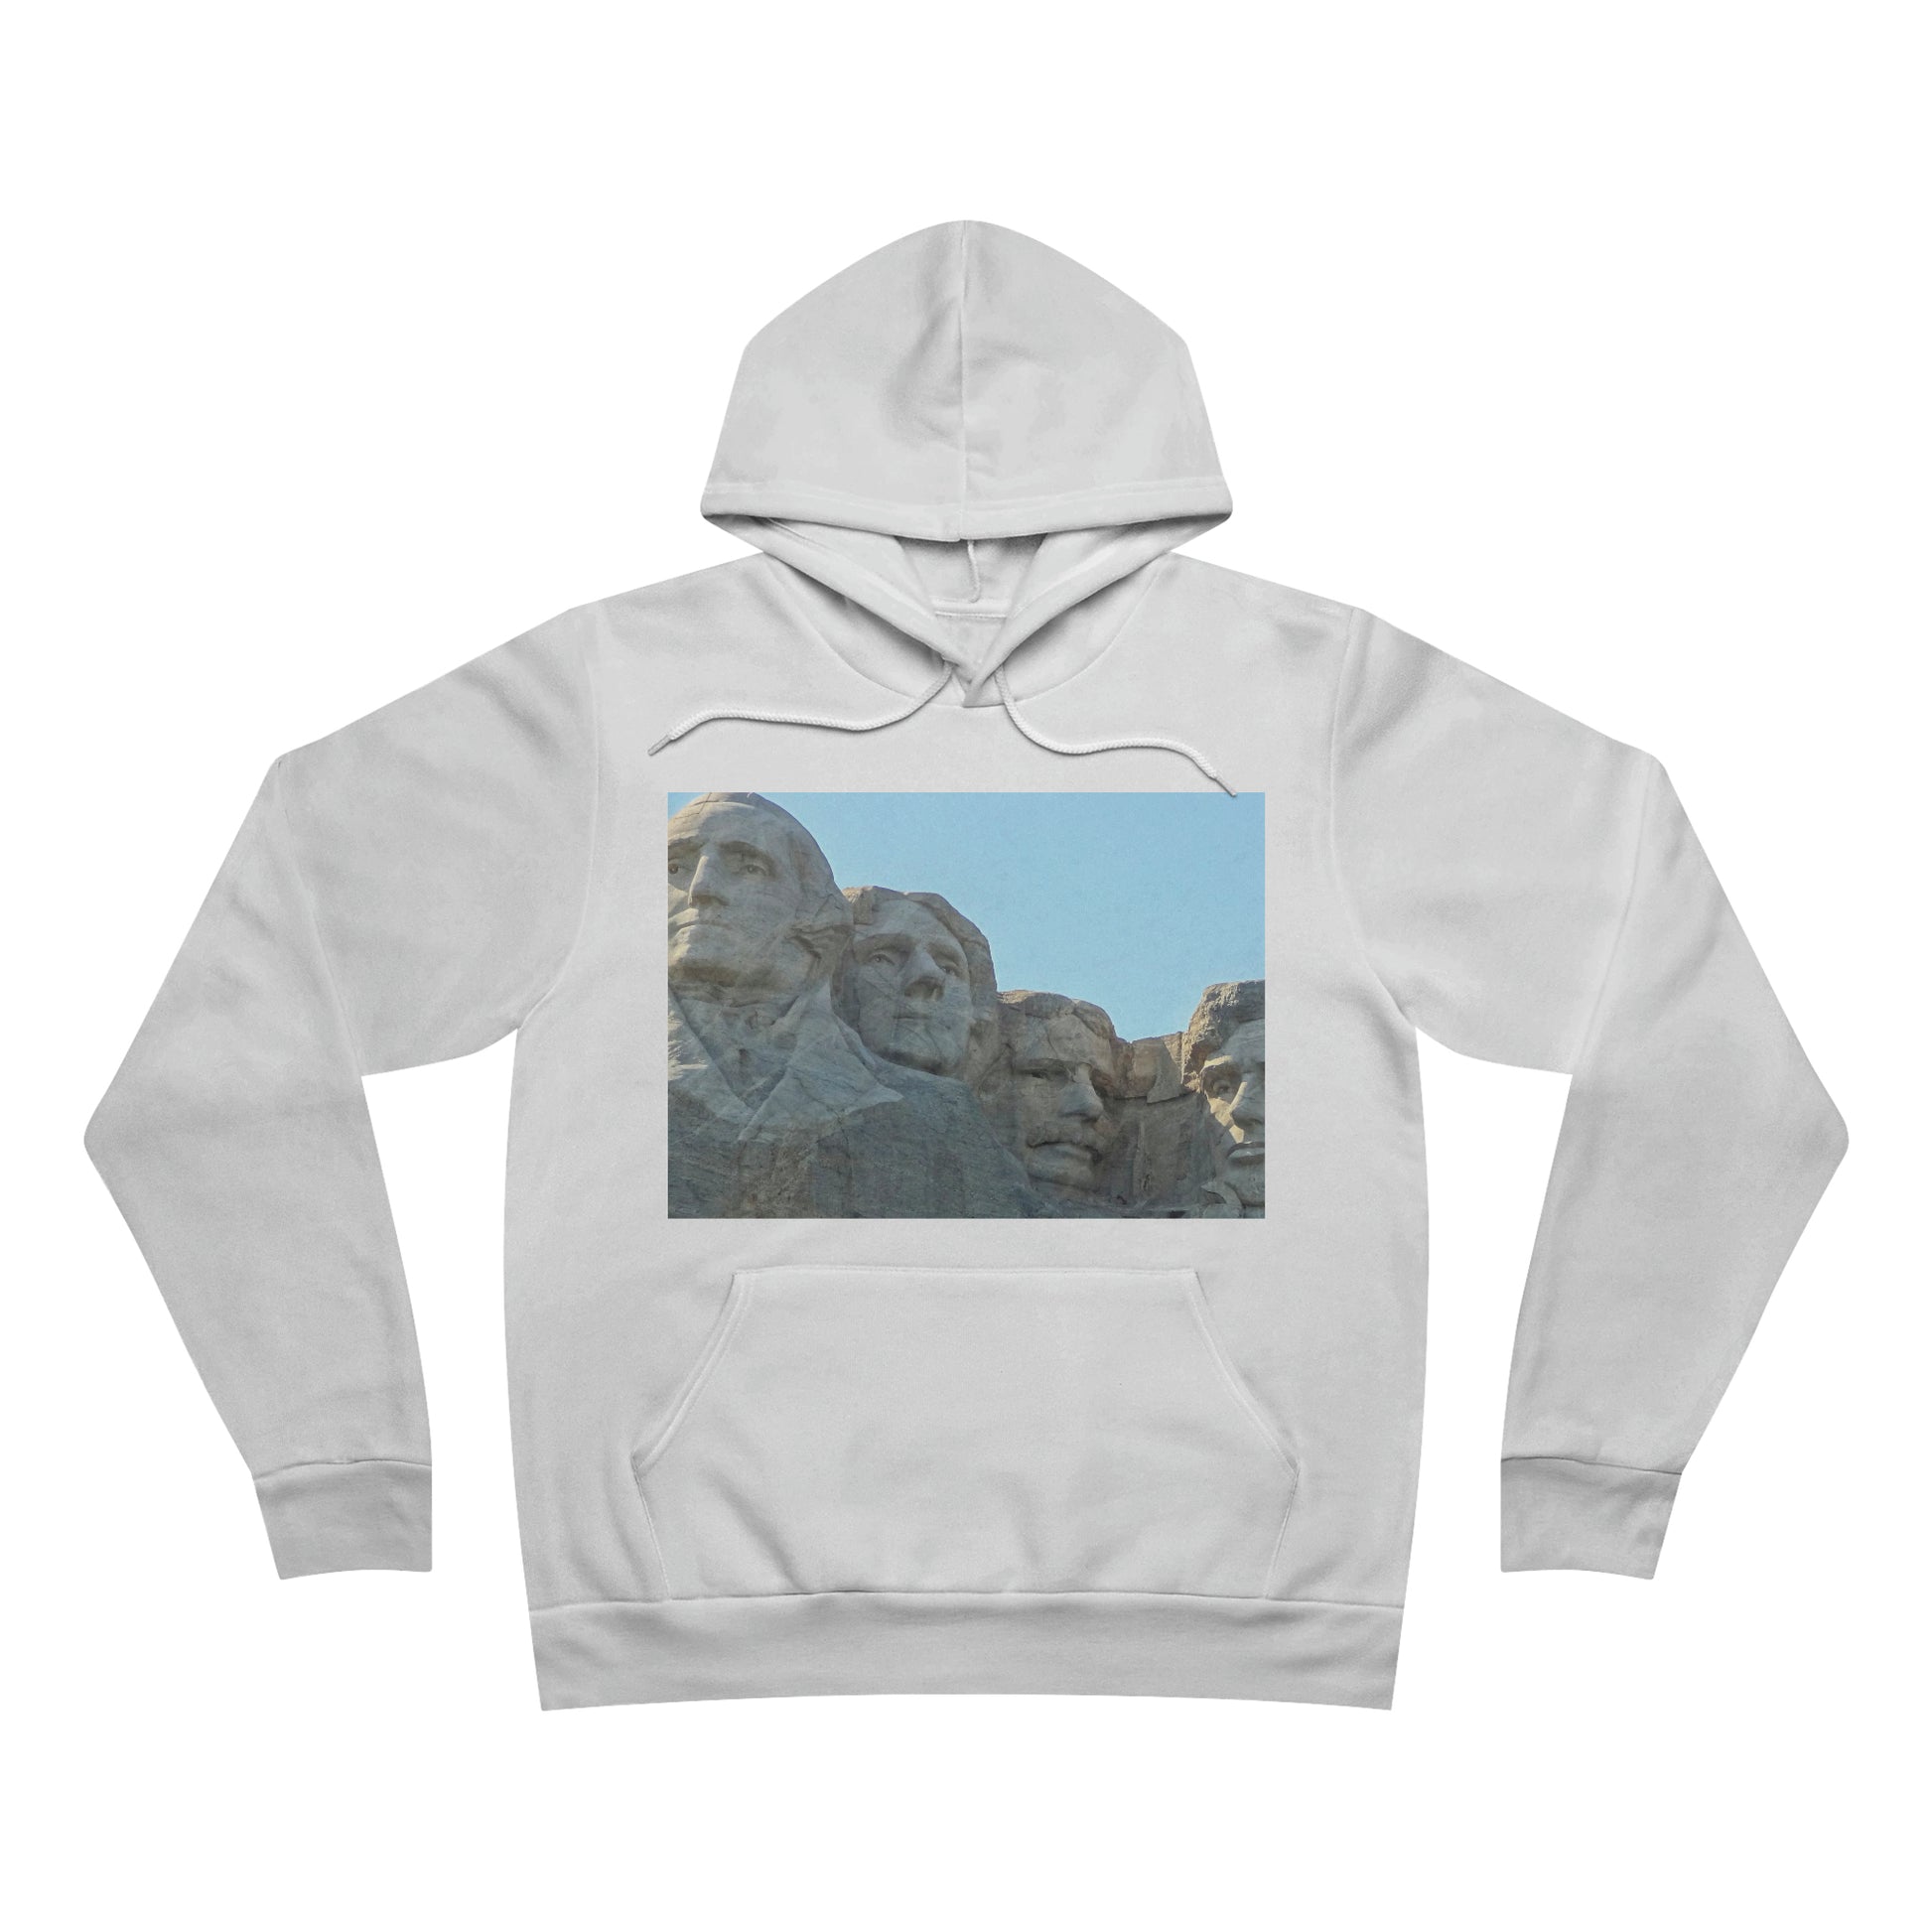 History Remembered Forever - Unisex Sponge Fleece Pullover Hoodie - Fry1Productions